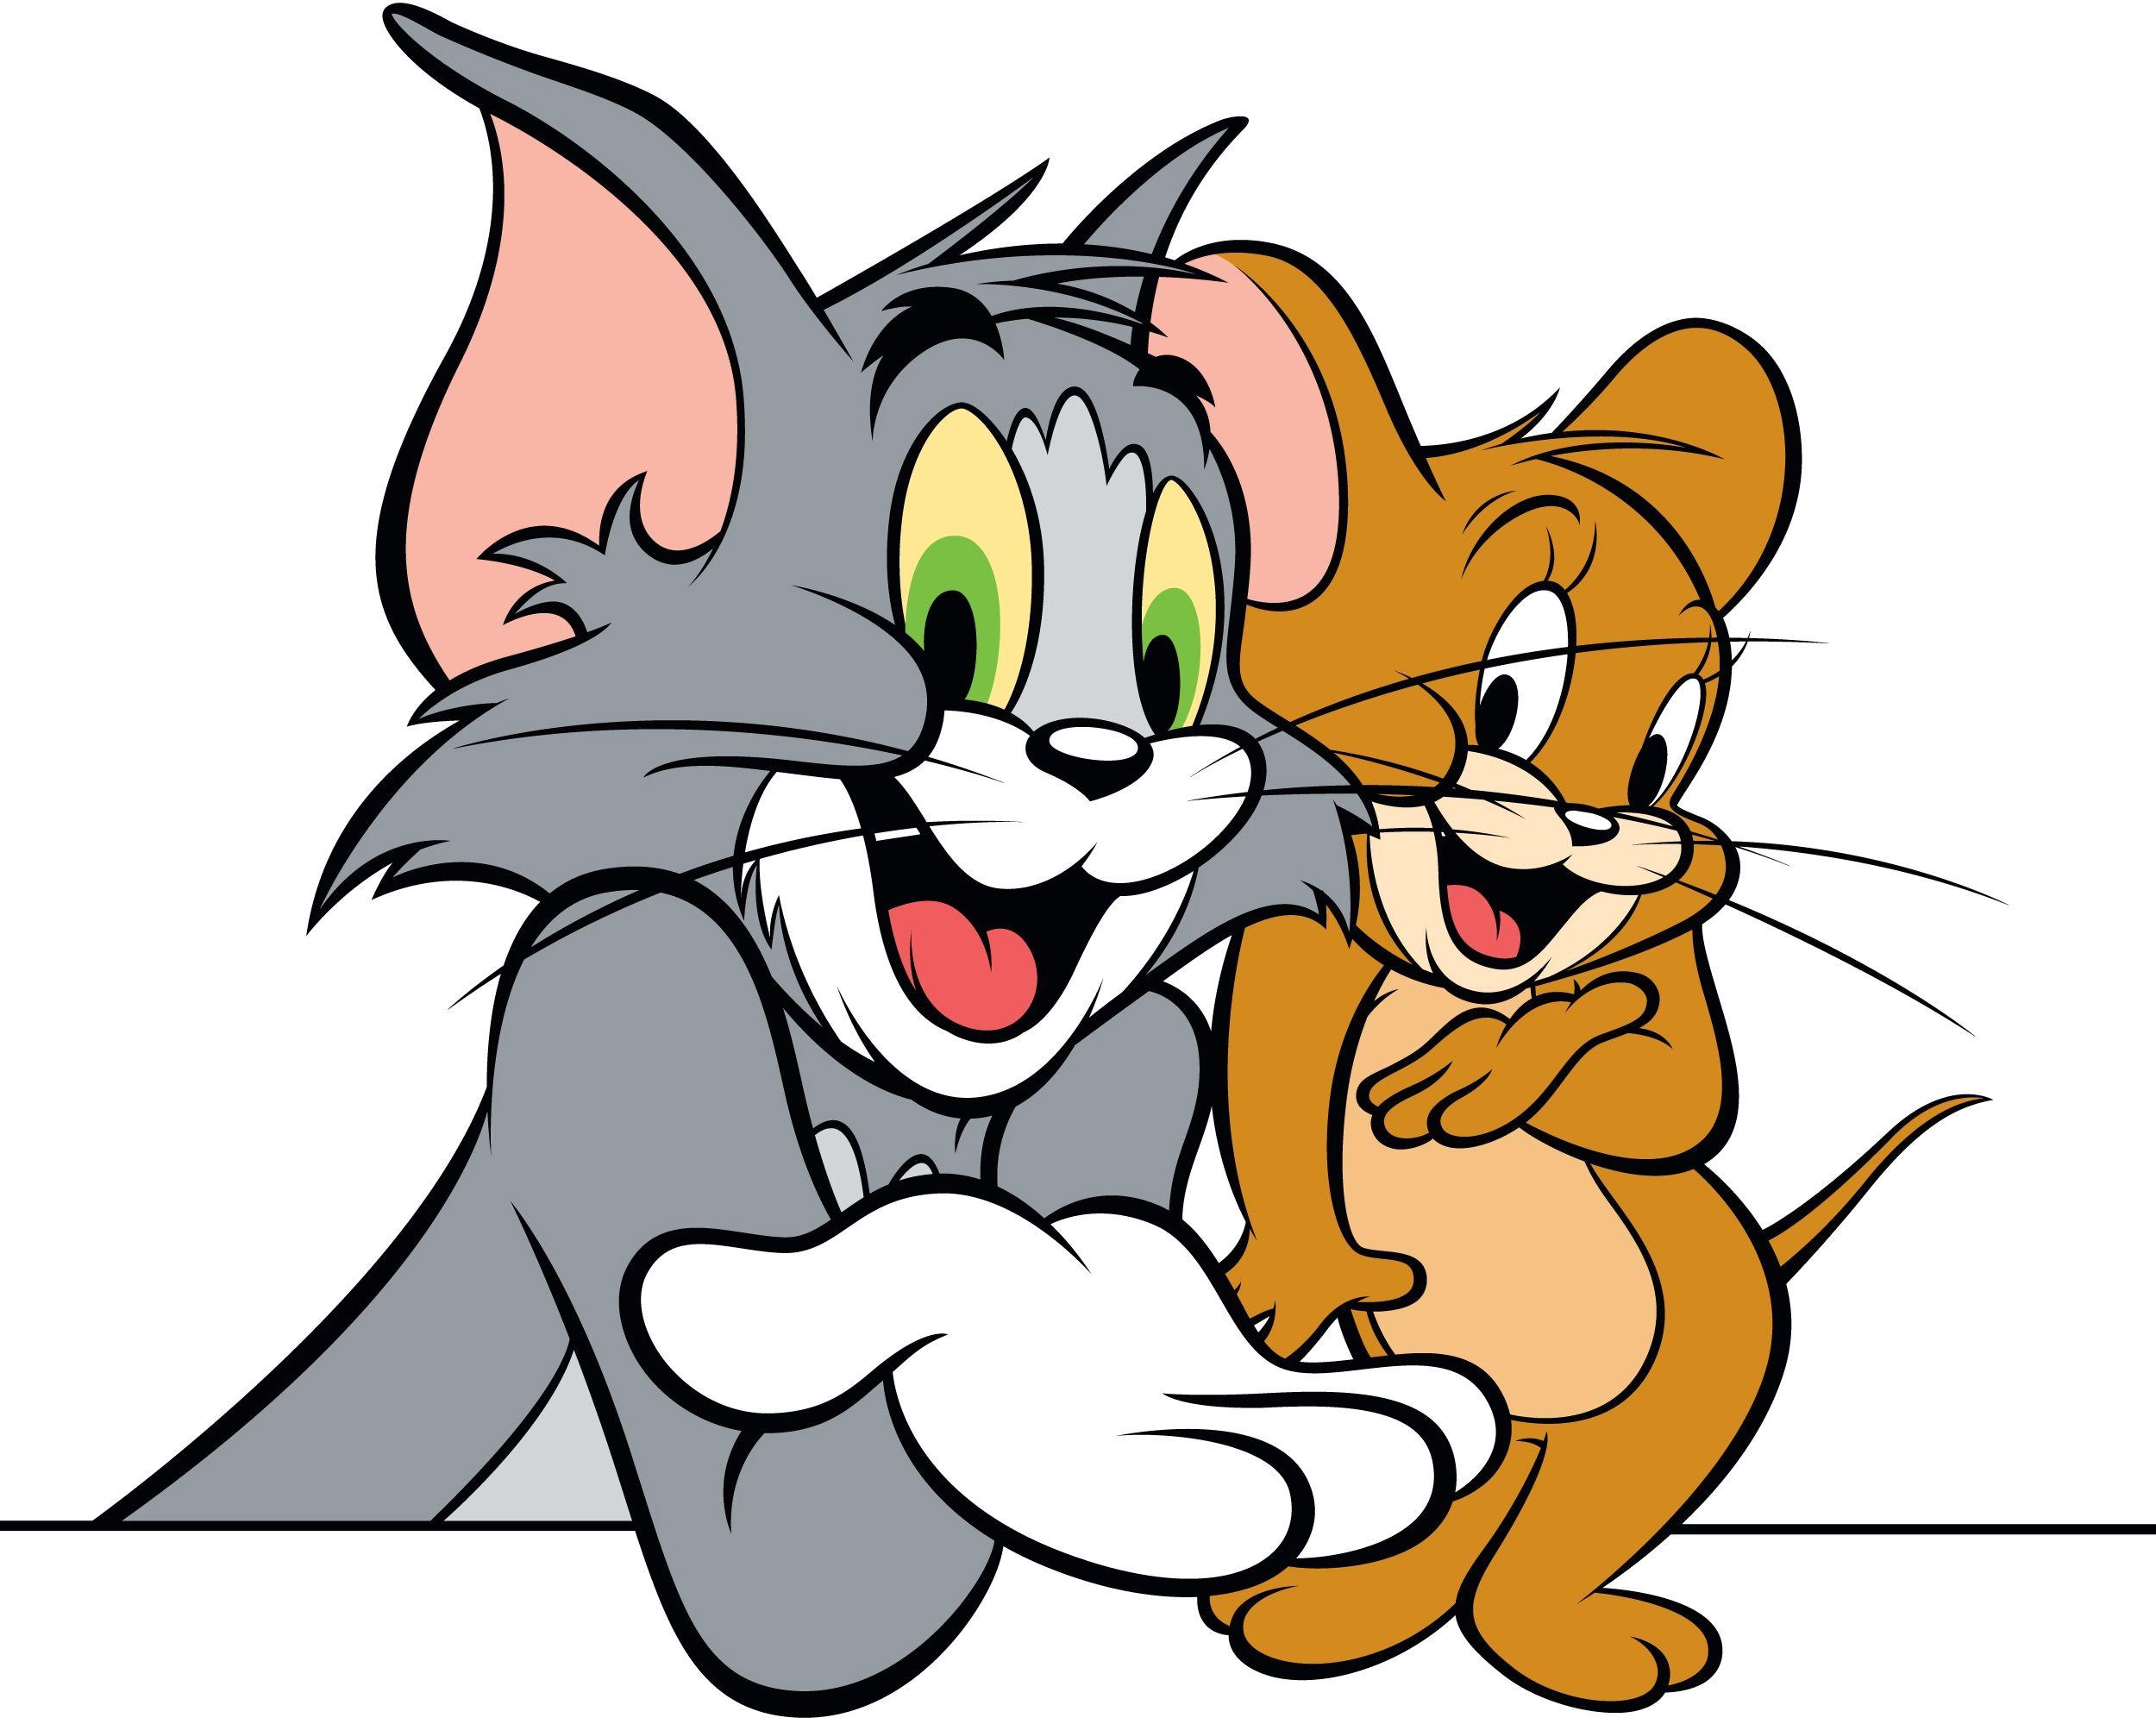 Tom And Jerry Wallpaper Free Download